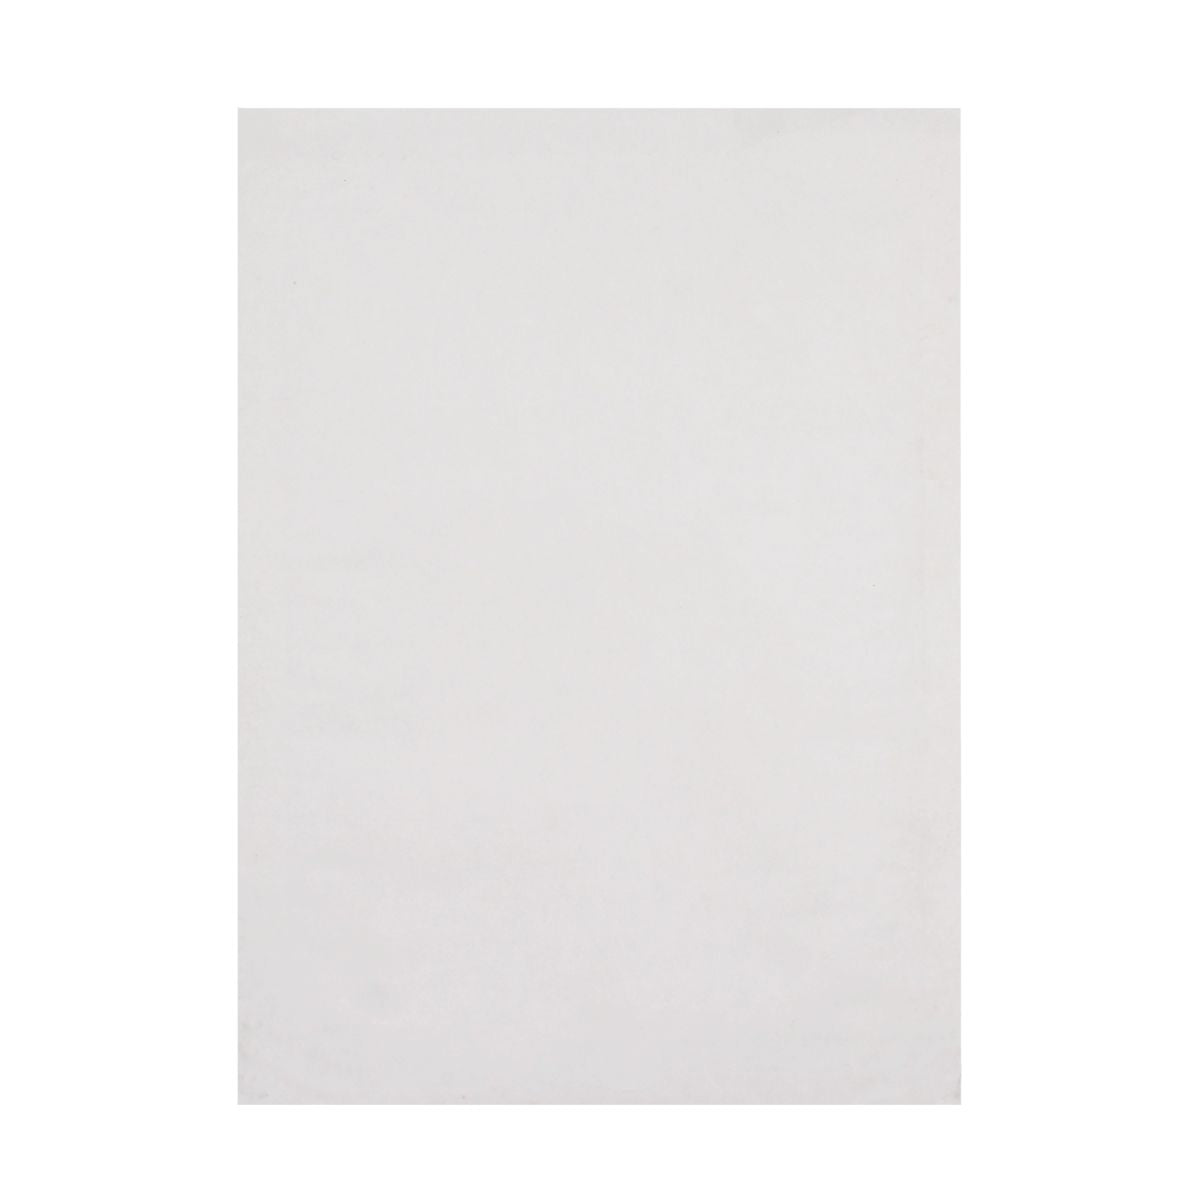 470mm x 350mm Eco Friendly Recyclable White Padded Envelope [Qty 50] - All Colour Envelopes